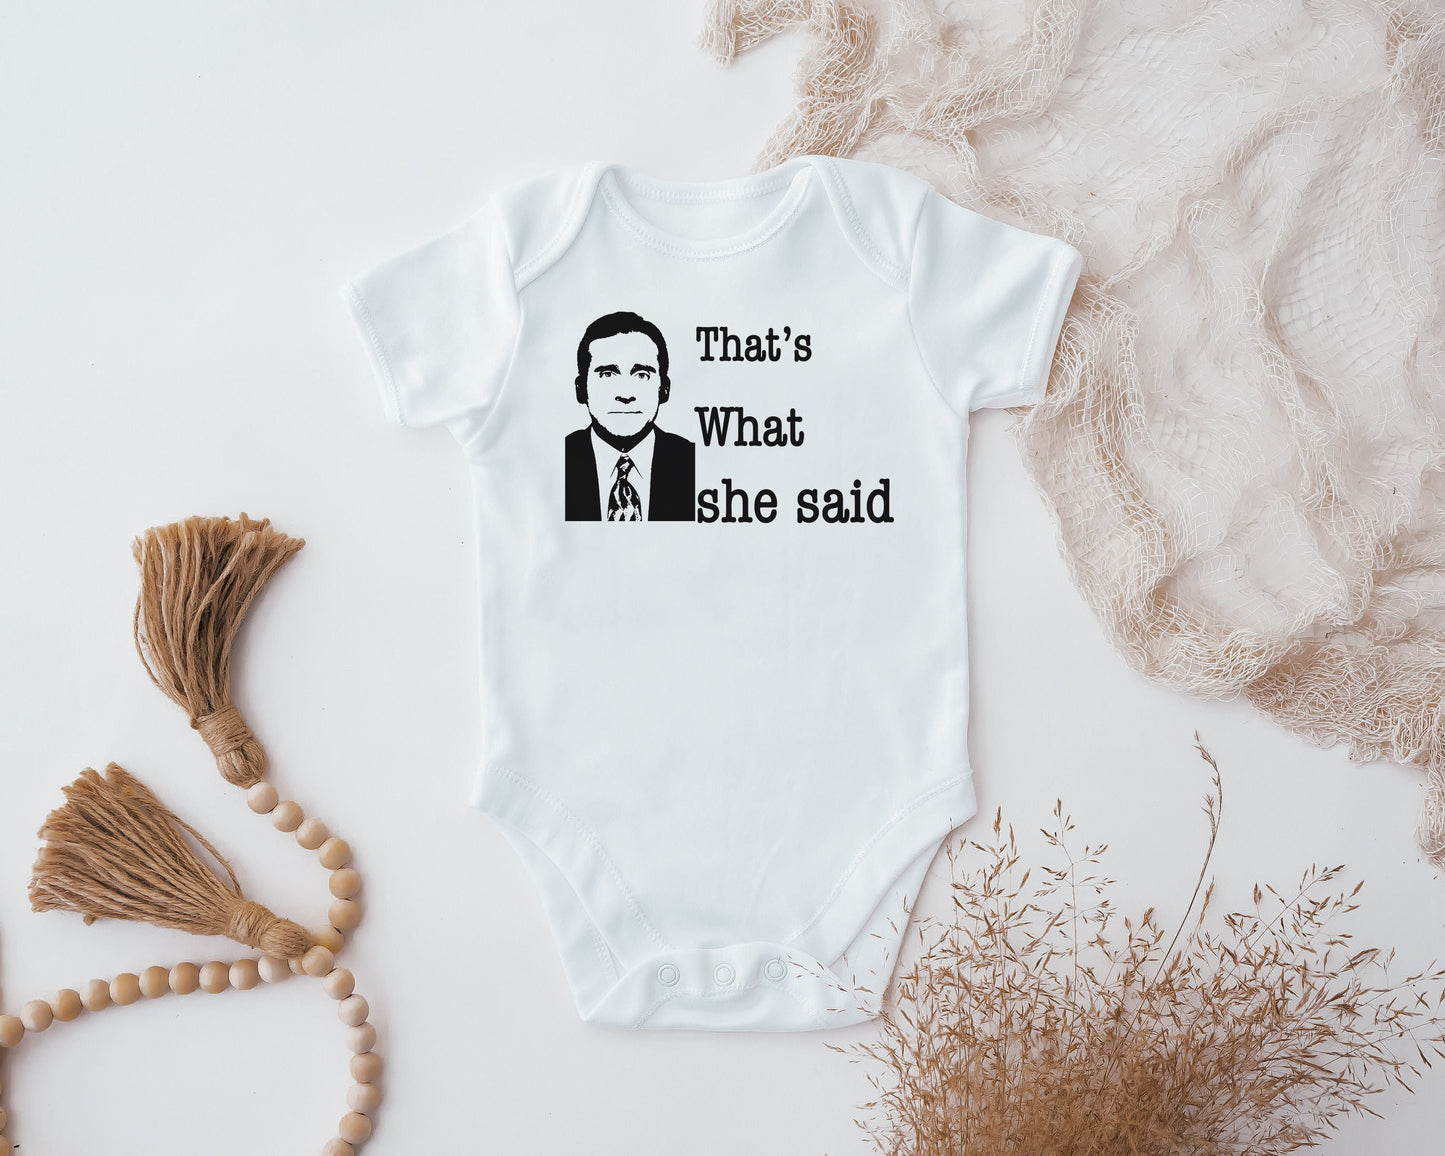 Thats What She Said Baby Baby Vest, Baby Grow, The Office Baby